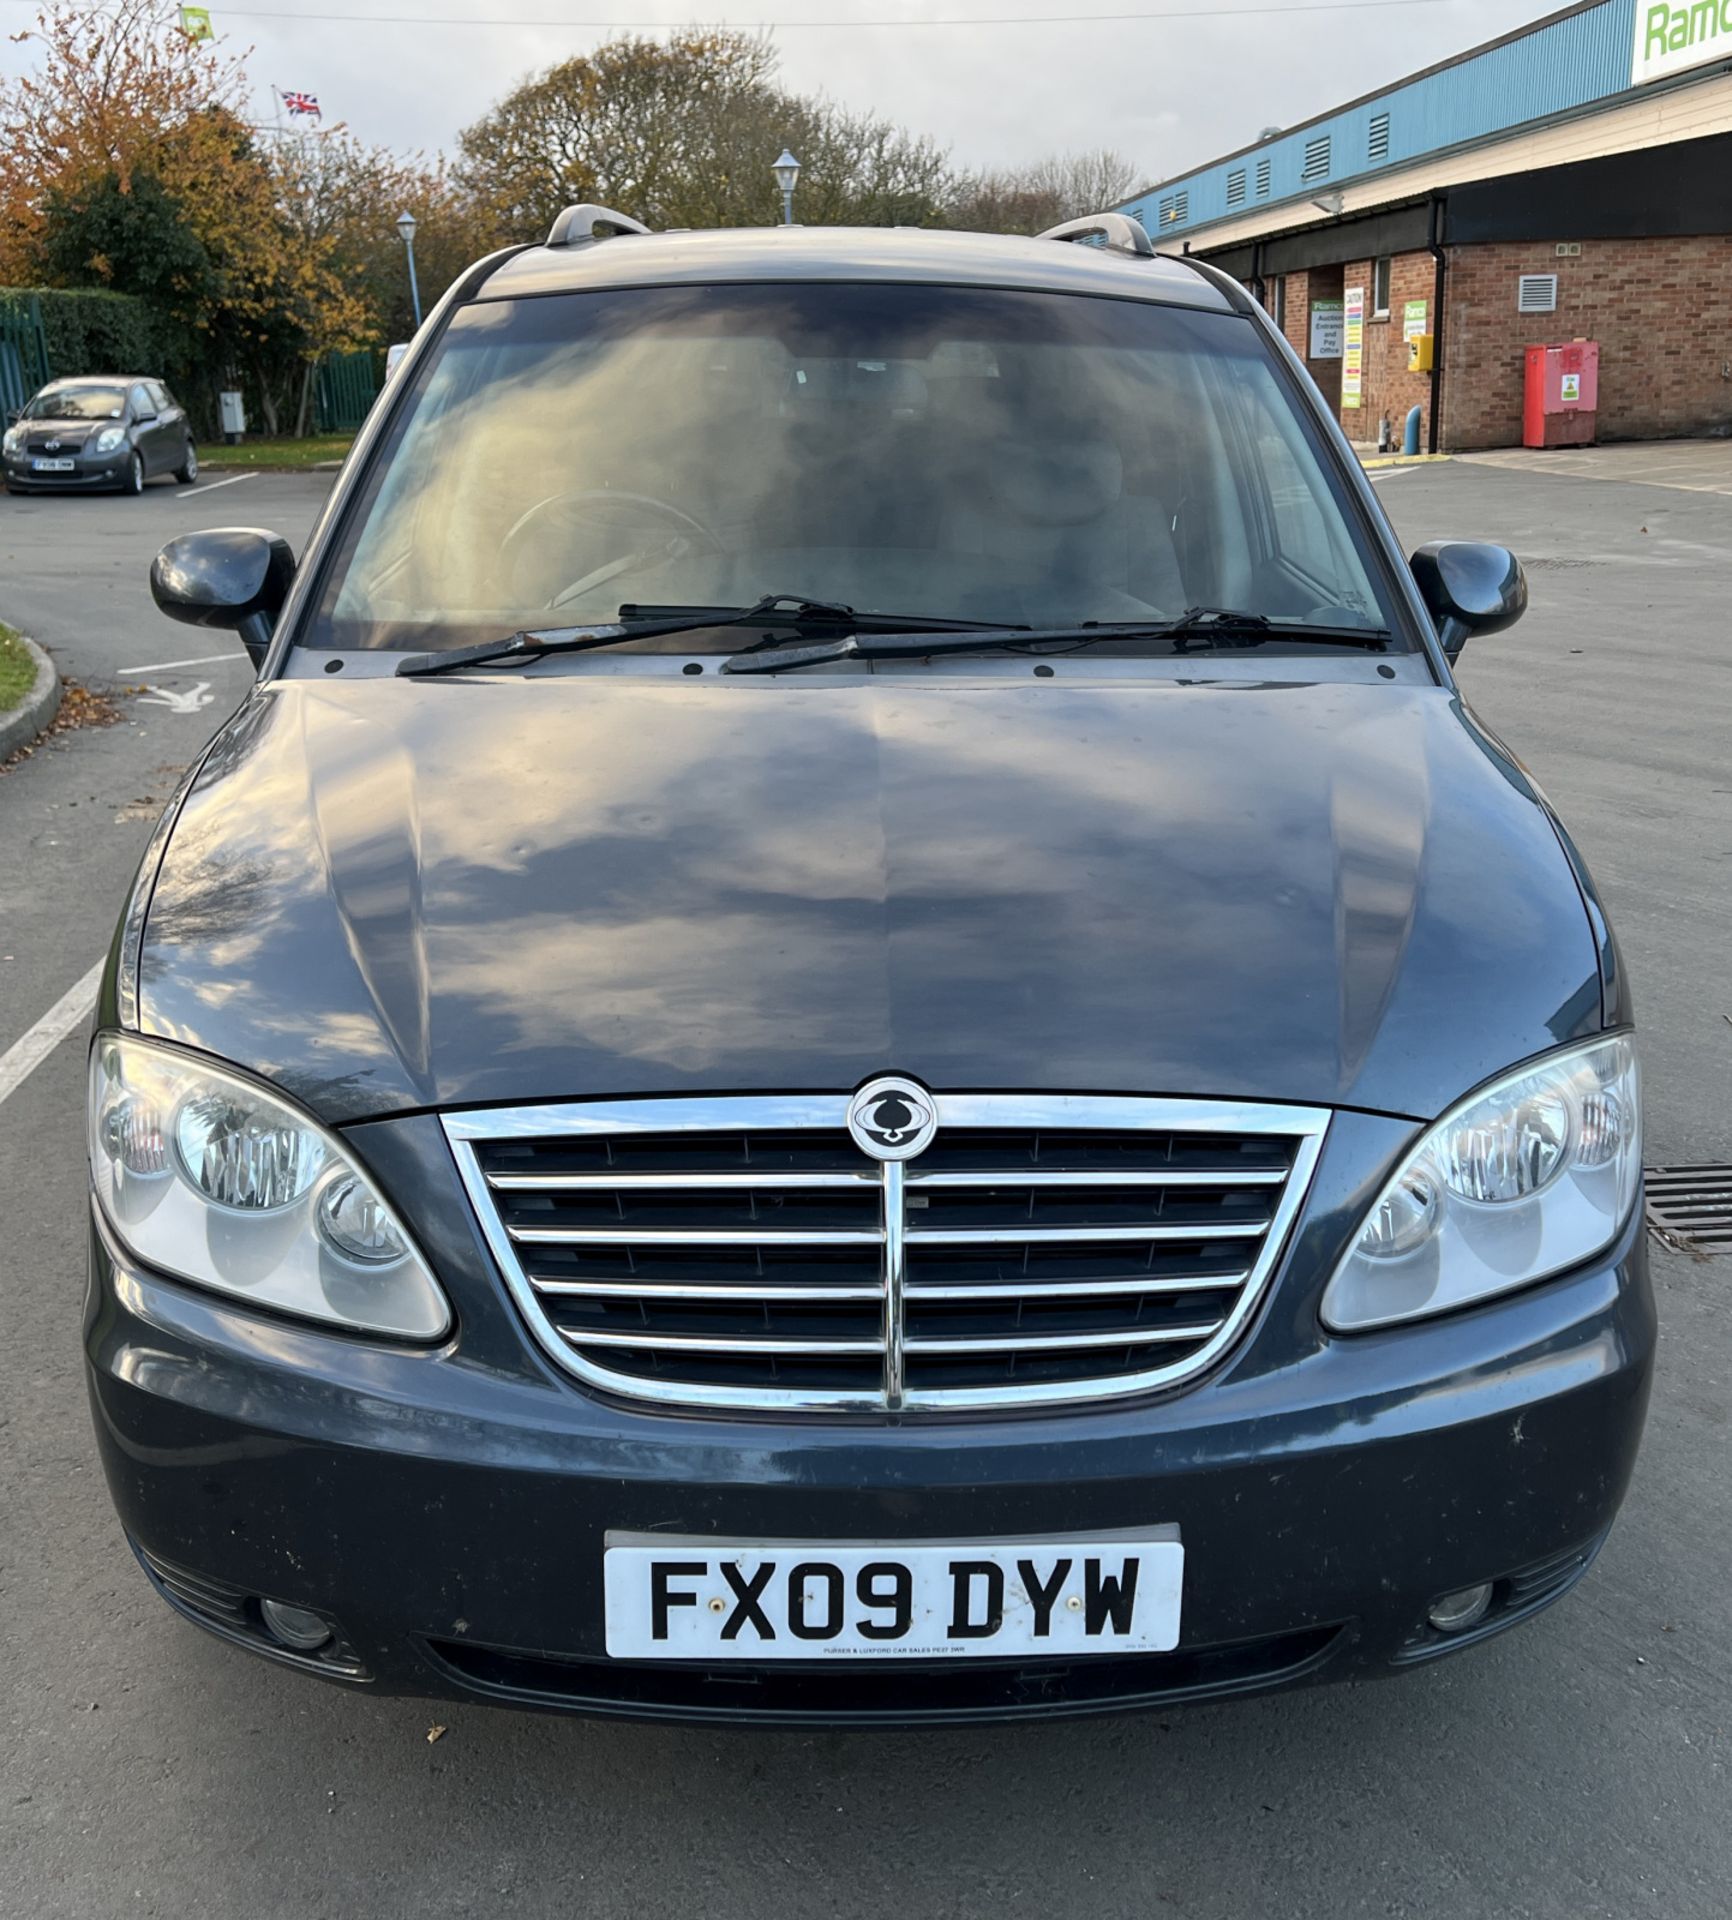 Ssangyong Rodius - 7 seater - 2.7L Mercedes engine - Please see description - Image 2 of 33